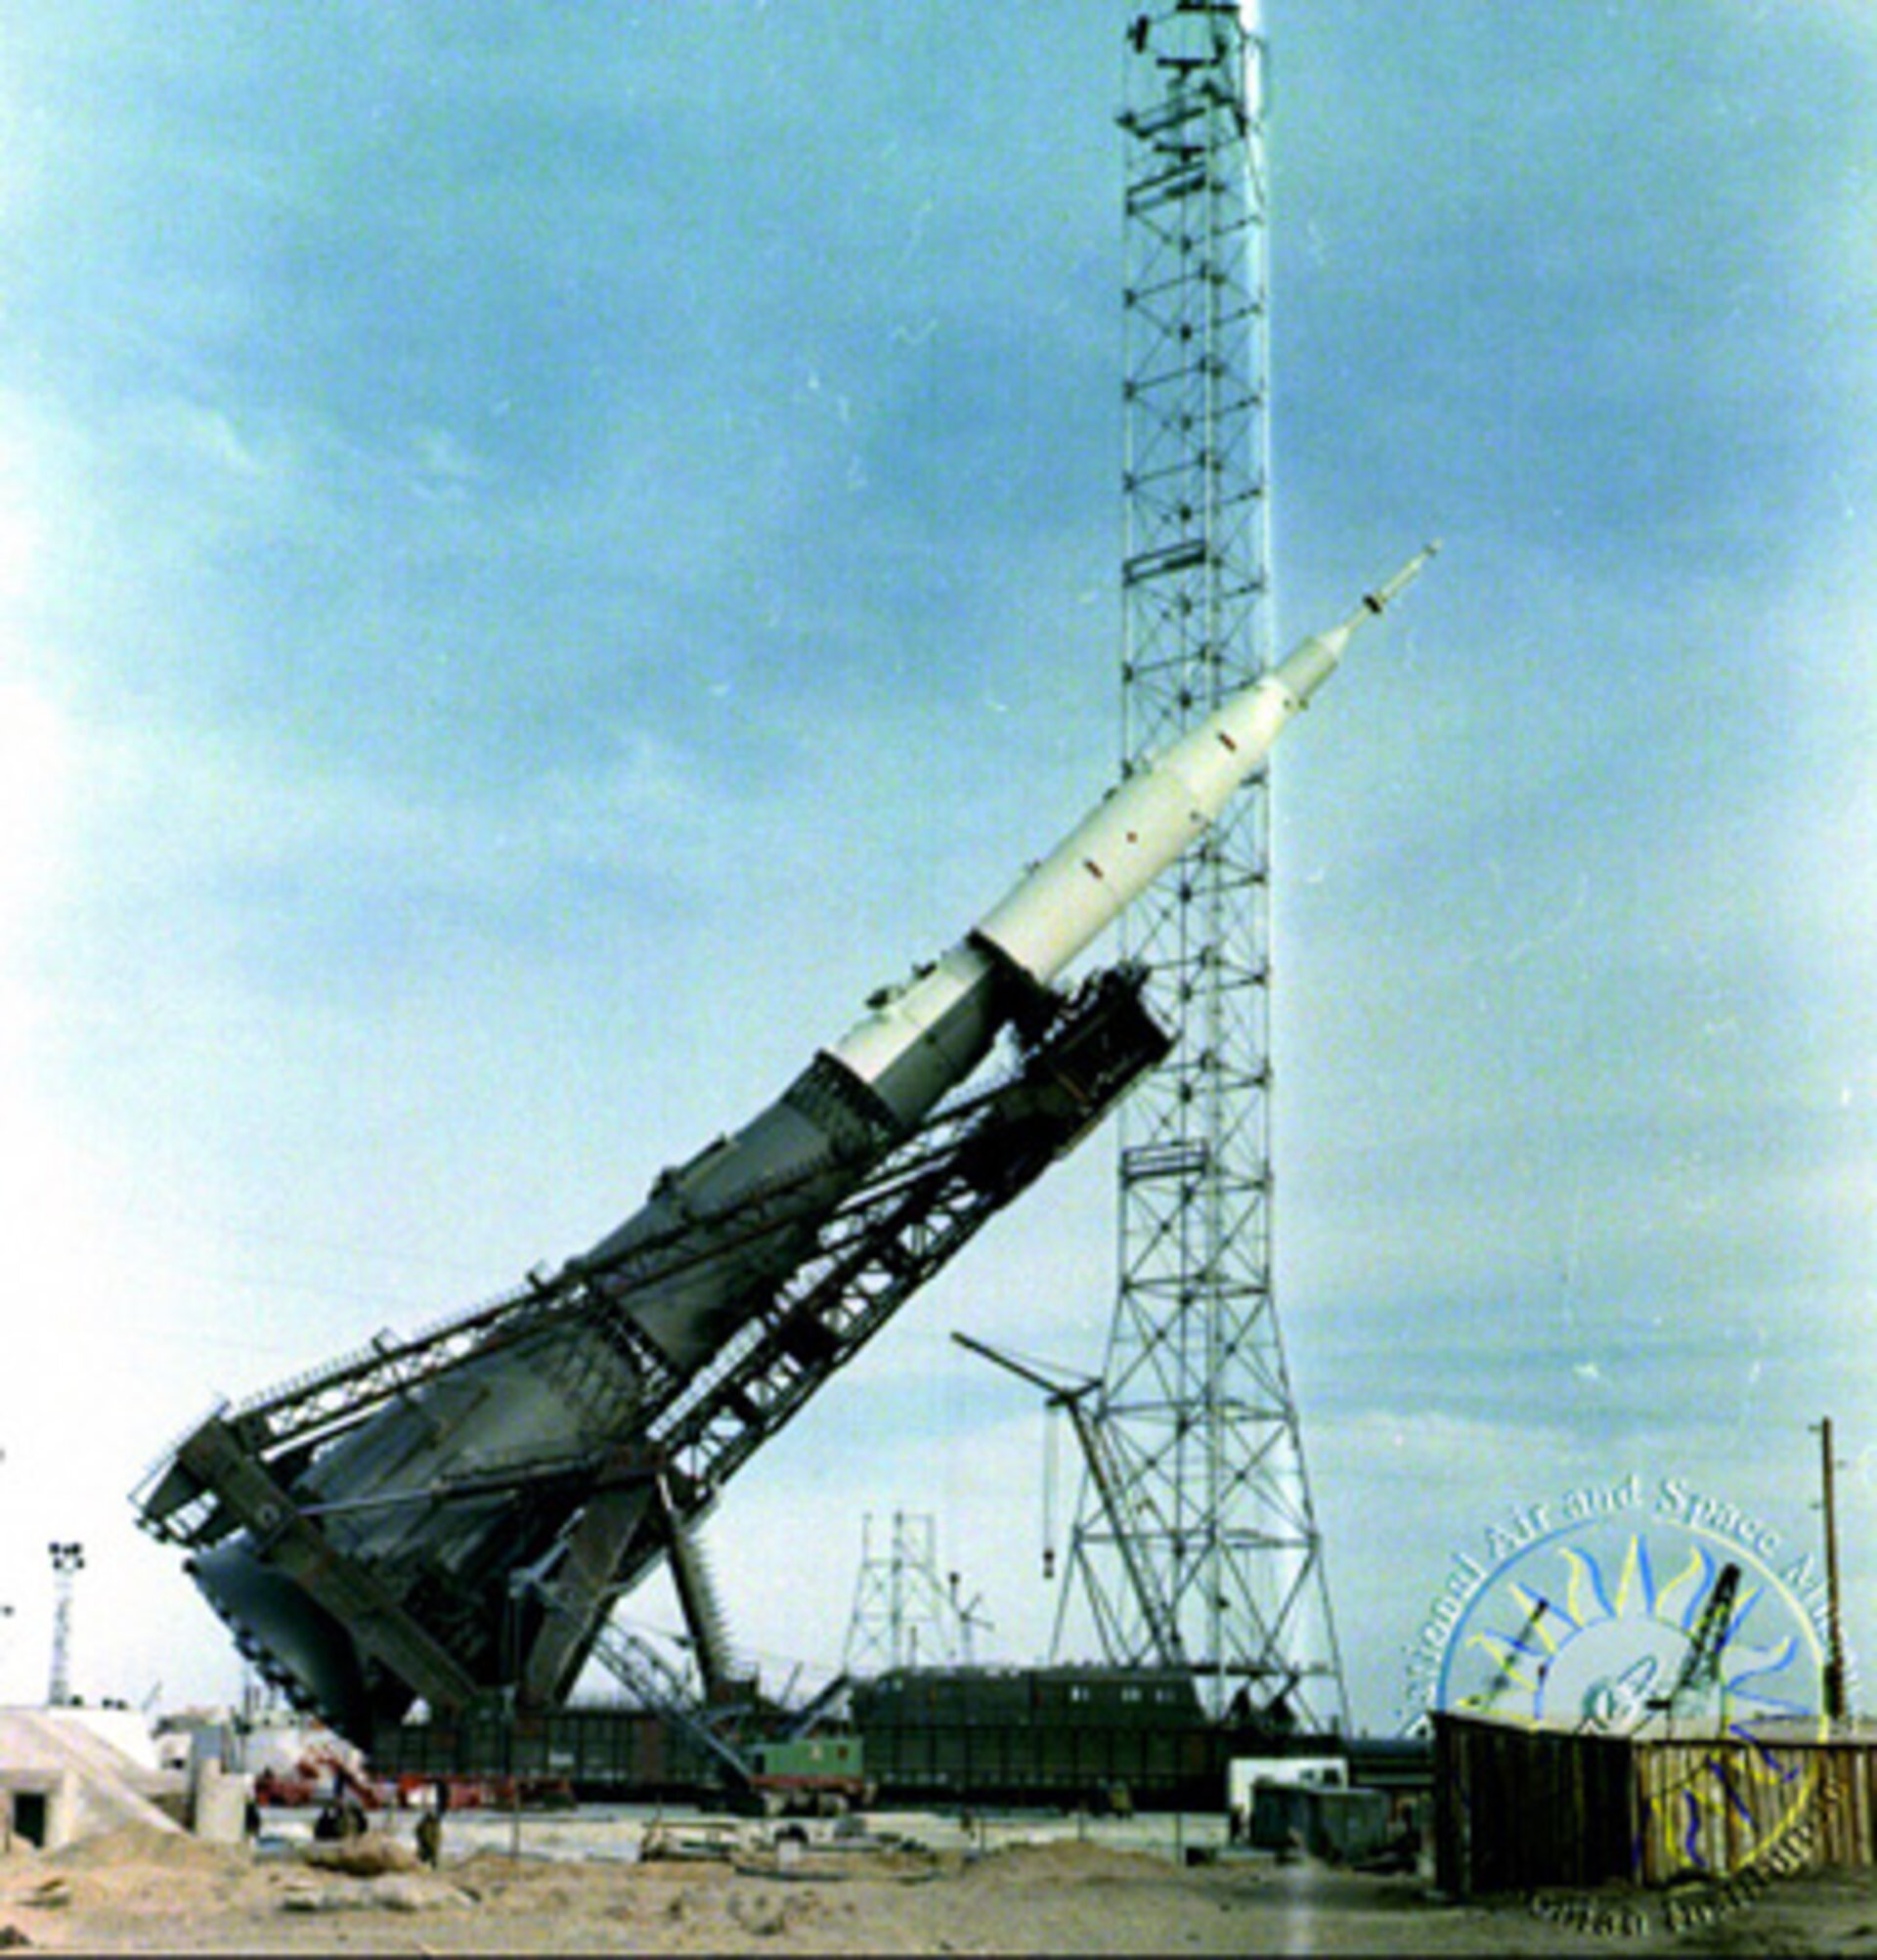 The N-1 booster